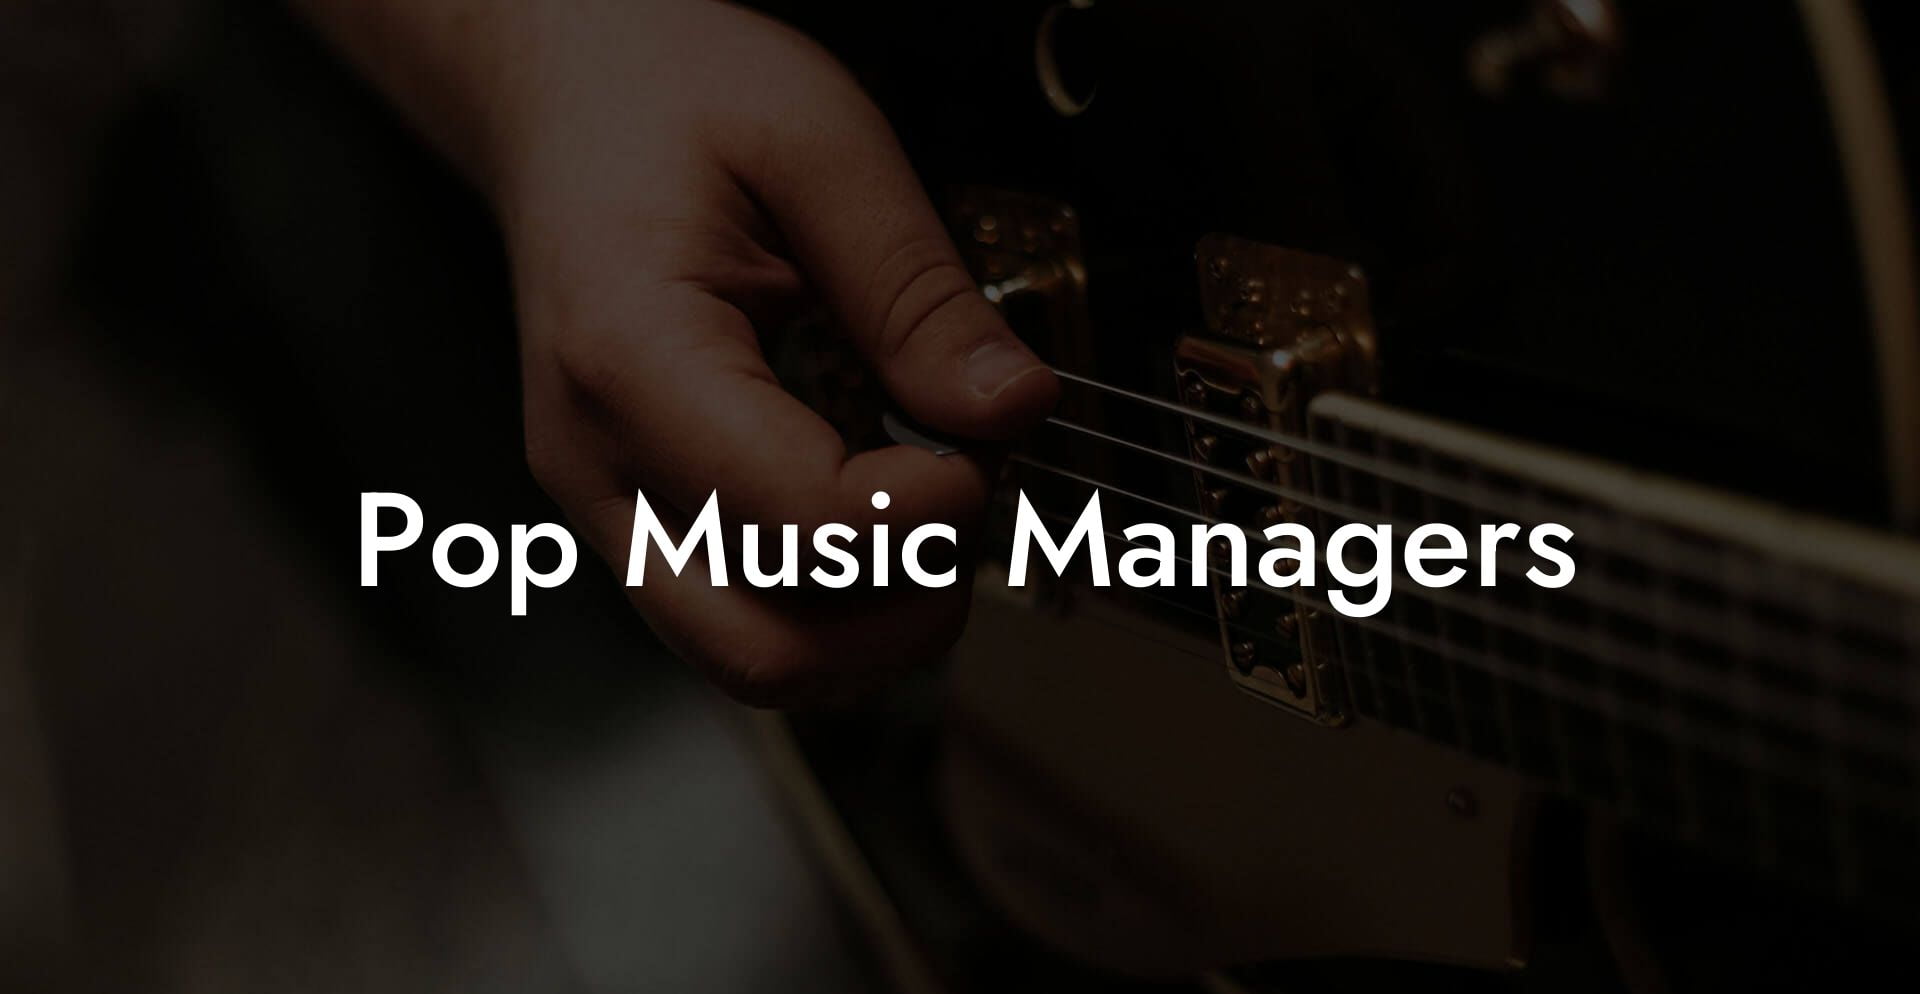 Pop Music Managers